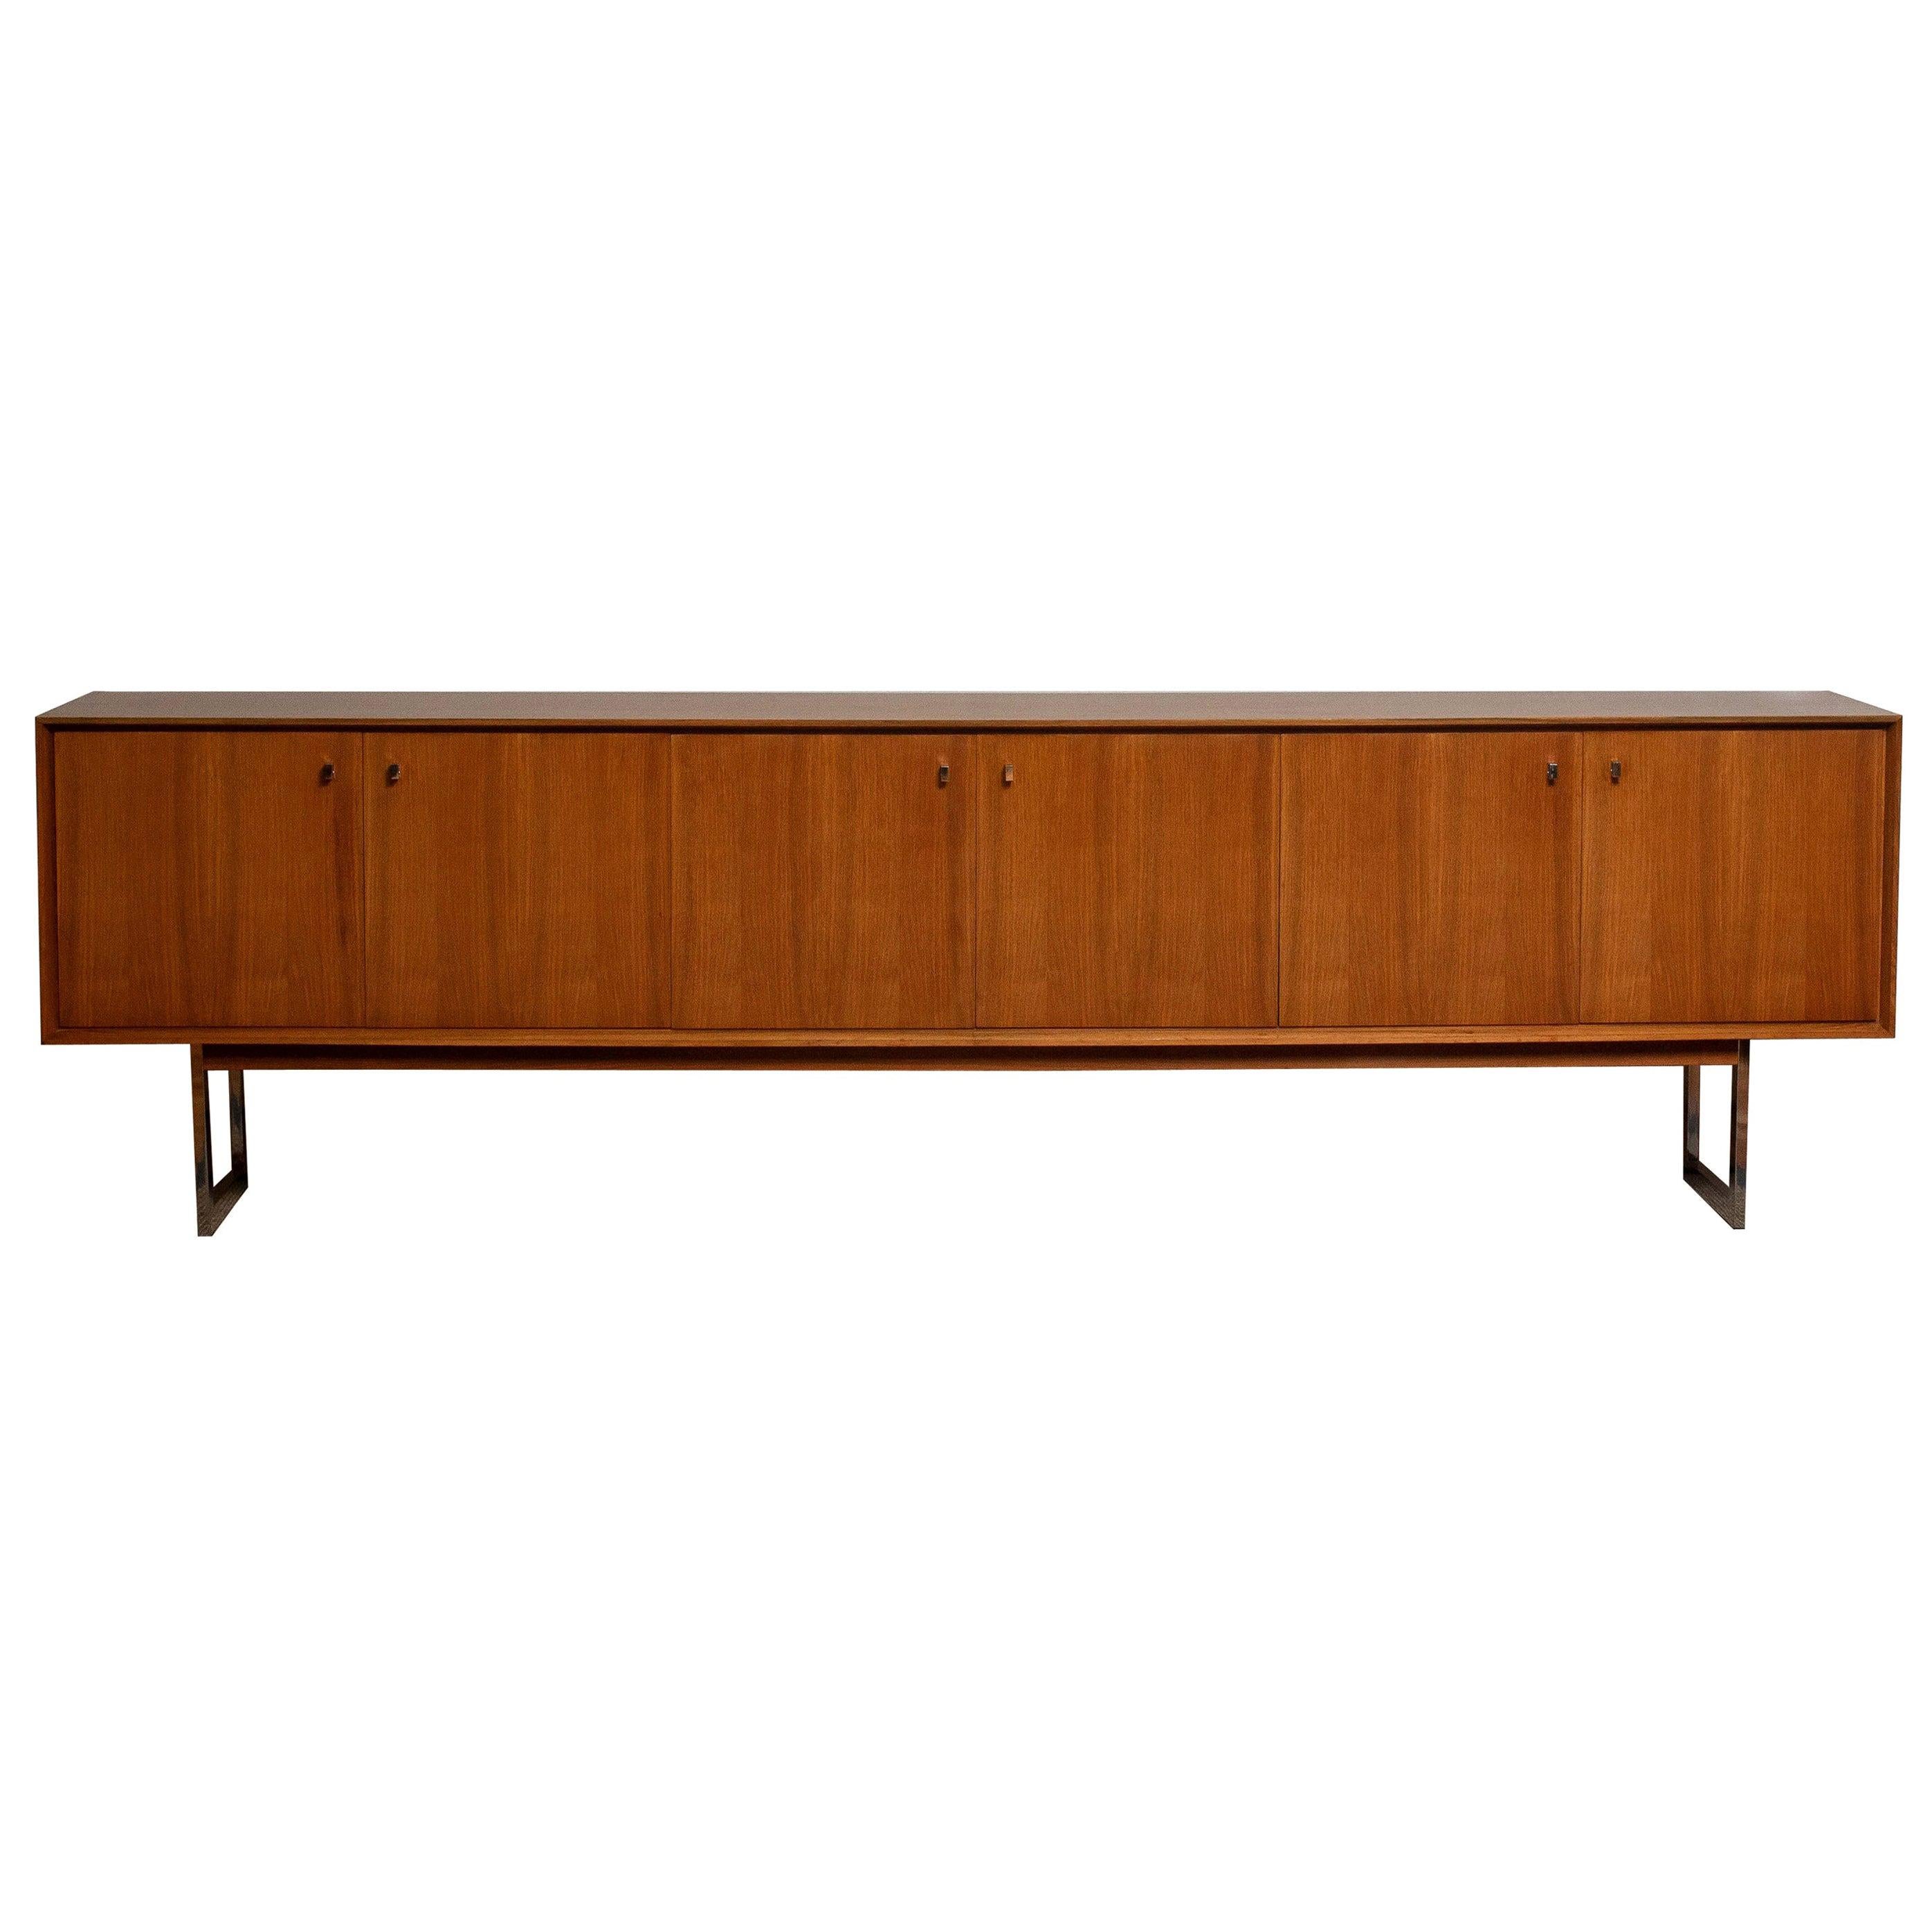 1970, Wide Credenzas Sideboard in Walnut with Chrome Handles and Legs